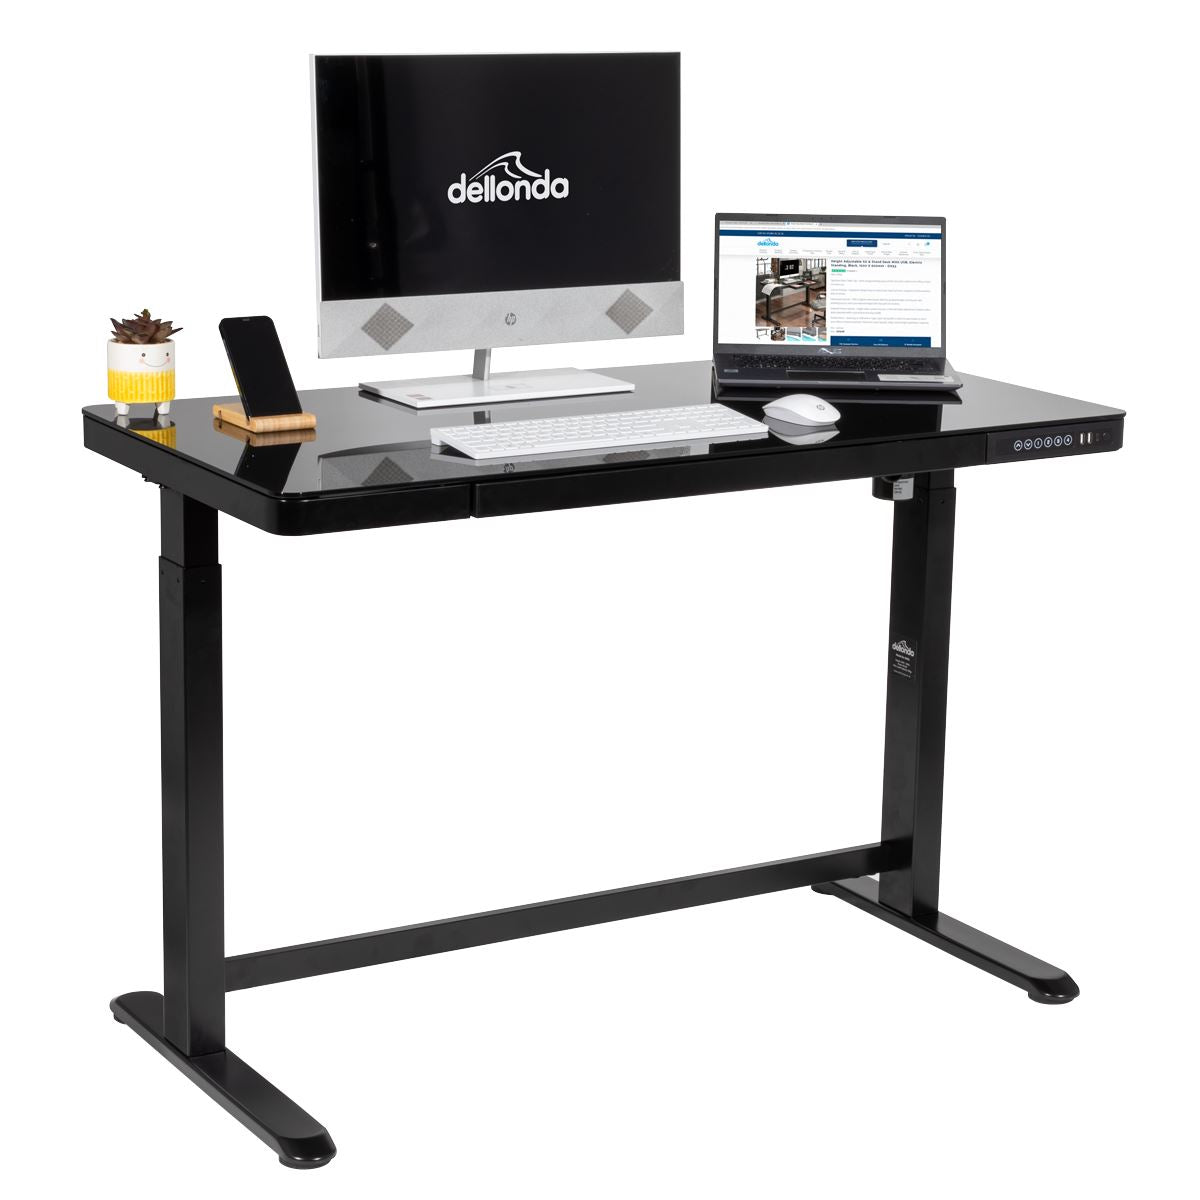 Dellonda Black Electric Adjustable Standing Desk with USB & Drawer, 1200 x 600mm